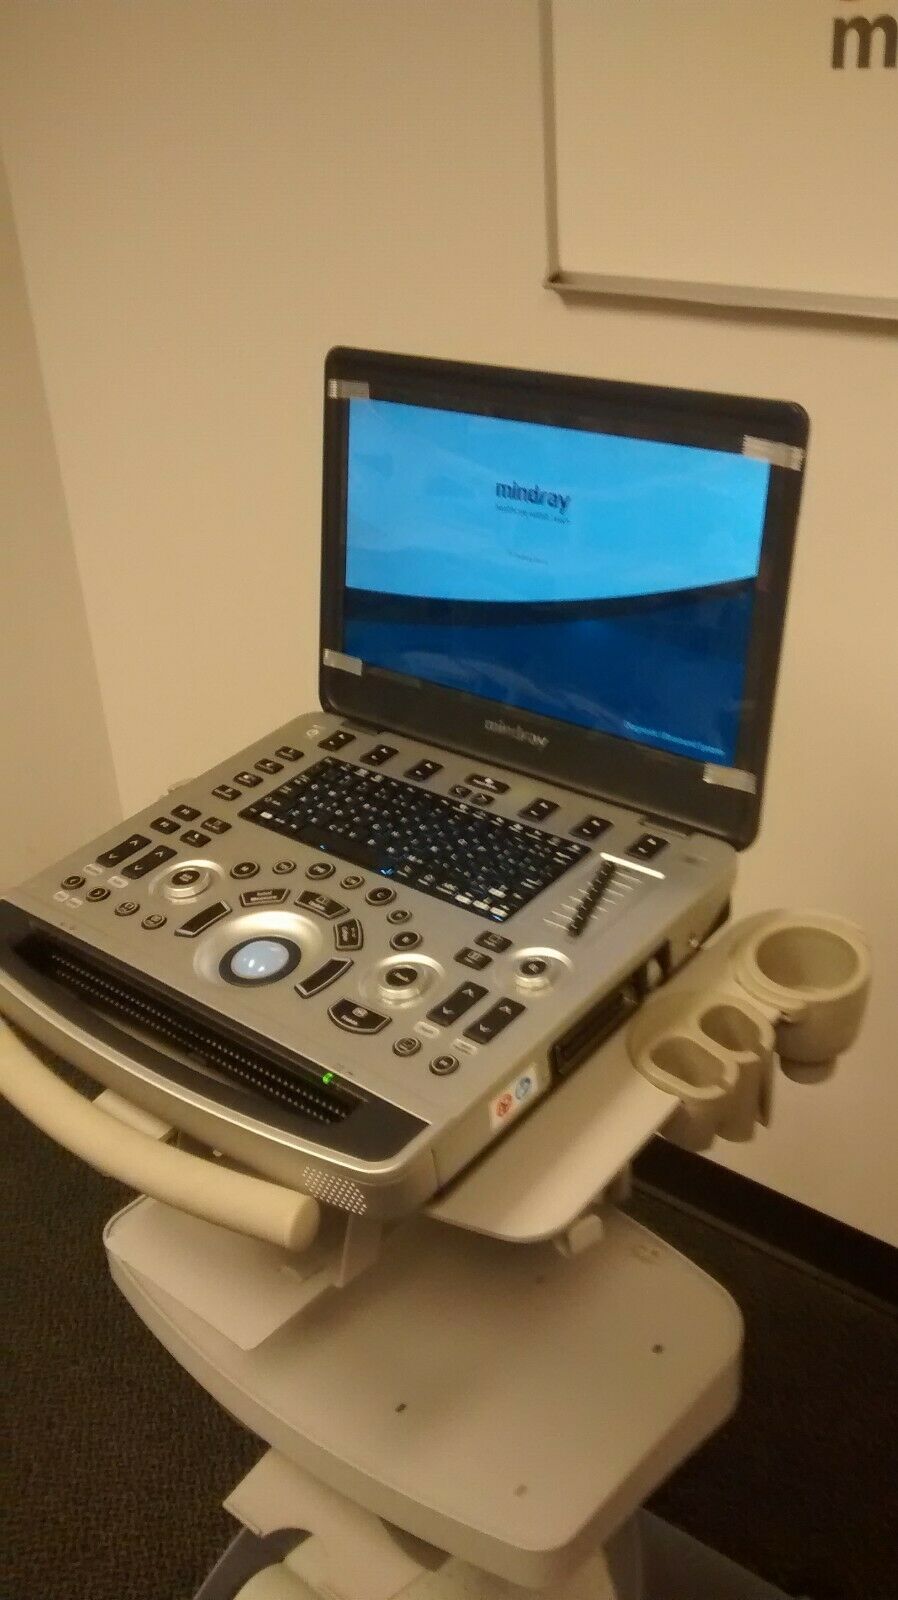 Mindray M9 Ultrasound System (Great Condition) DIAGNOSTIC ULTRASOUND MACHINES FOR SALE